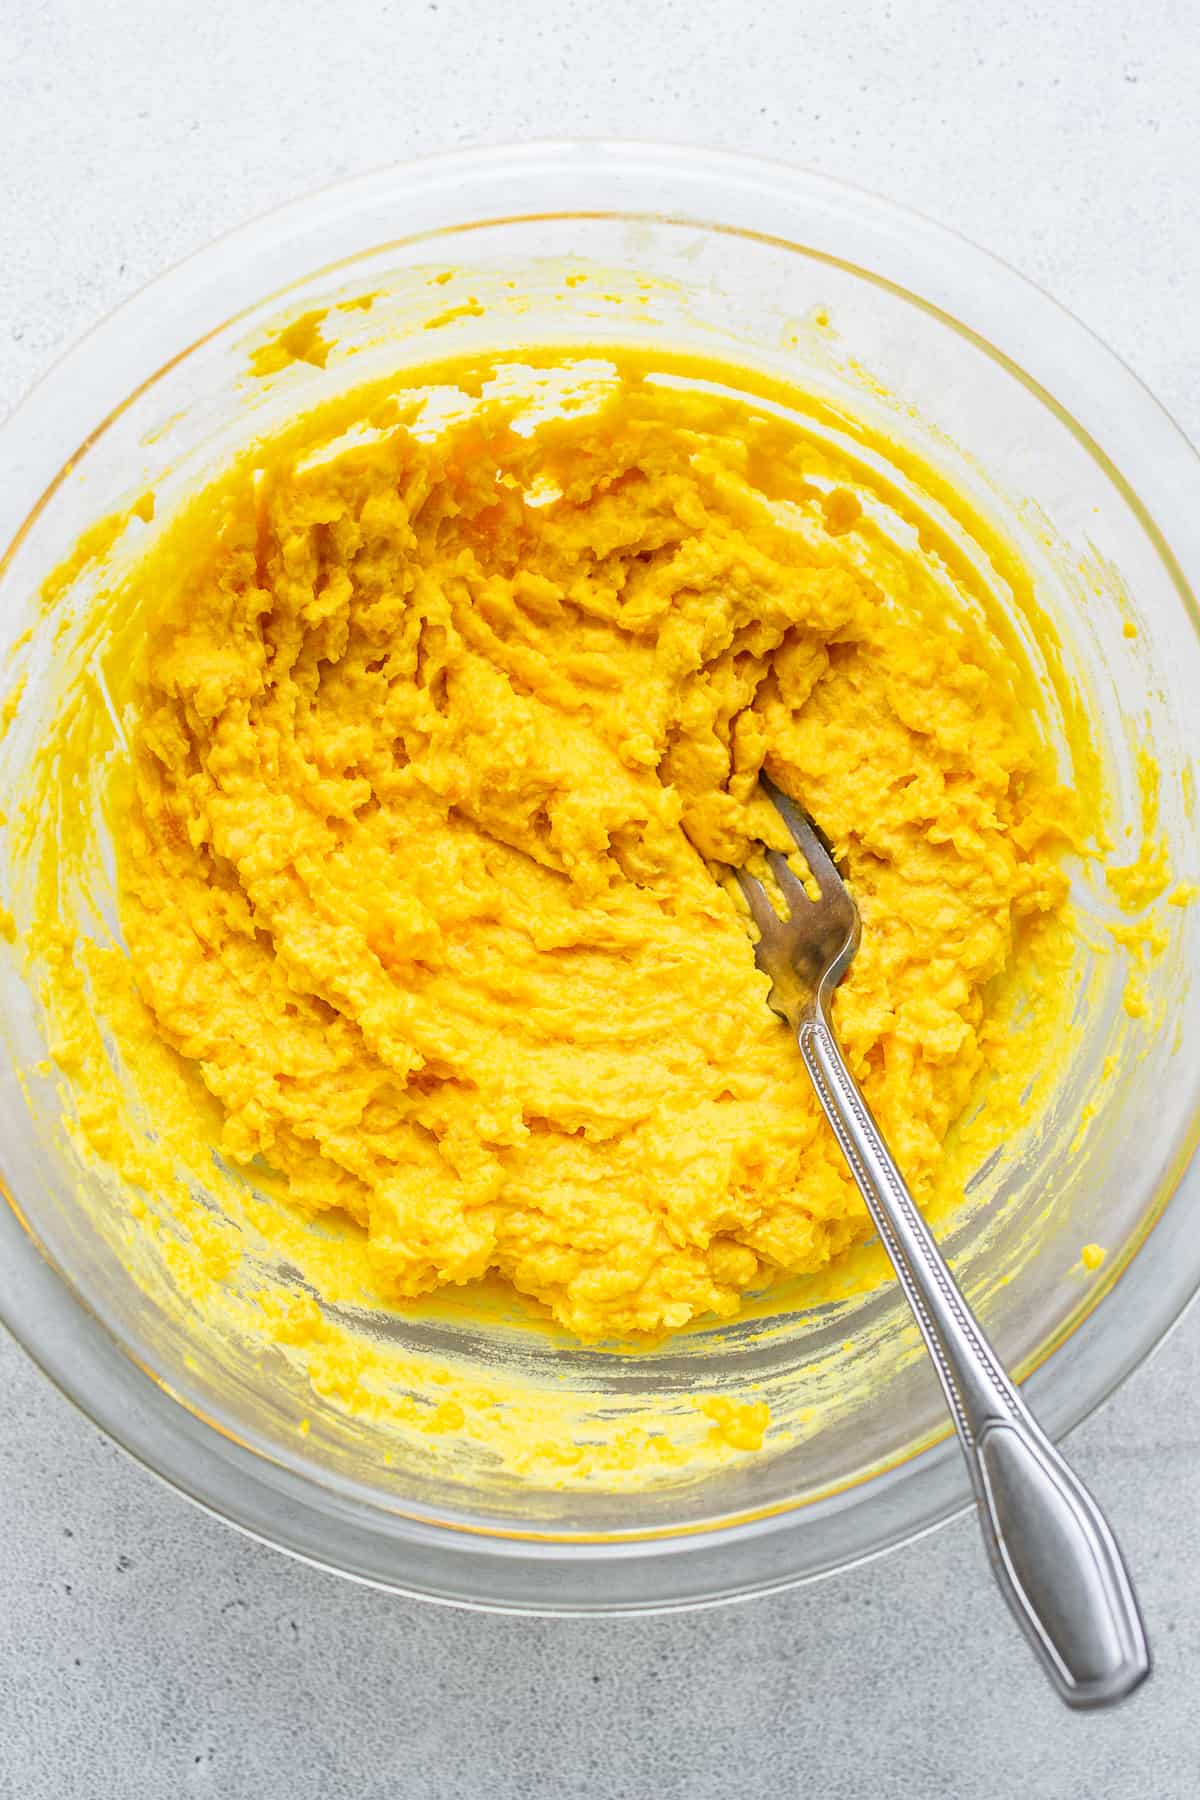 Mix the egg yolks in a bowl with a fork.